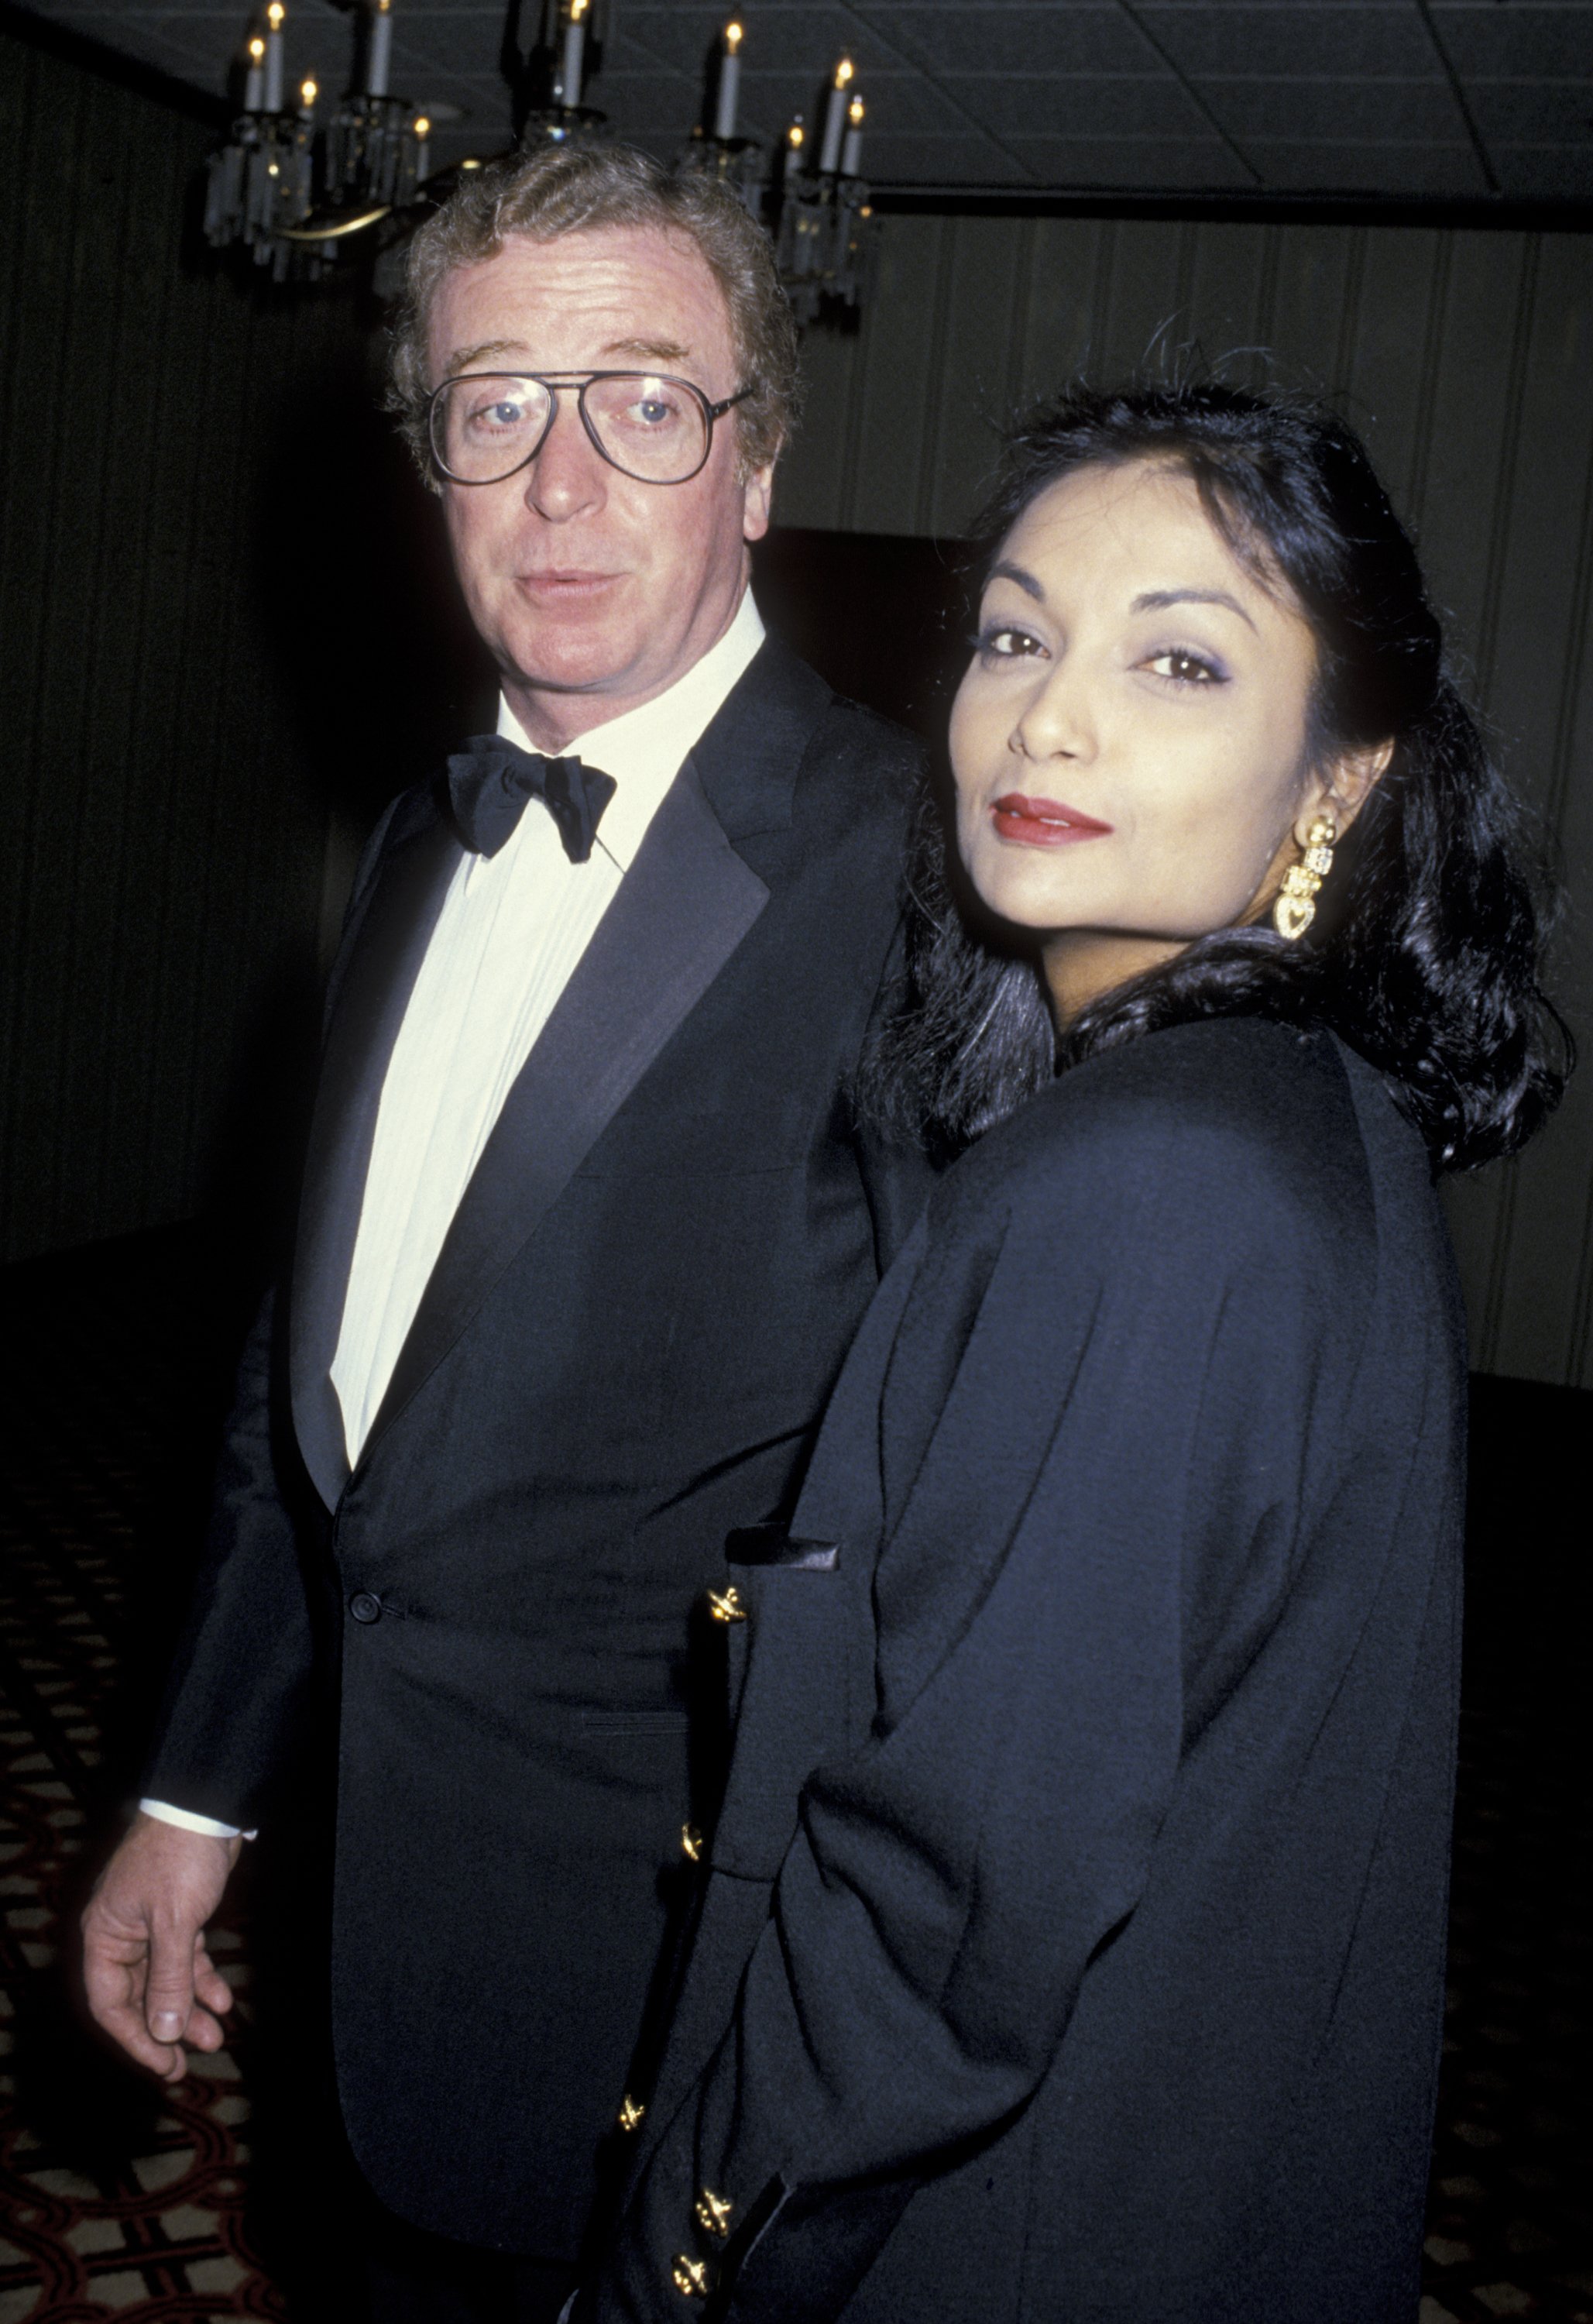 Michael Caine and wife Shakira Caine attending the 13th Annual Whitney Young Awards at the Century Plaza Hotel on March 20, 1986 in Century City, California. / Source: Getty Images